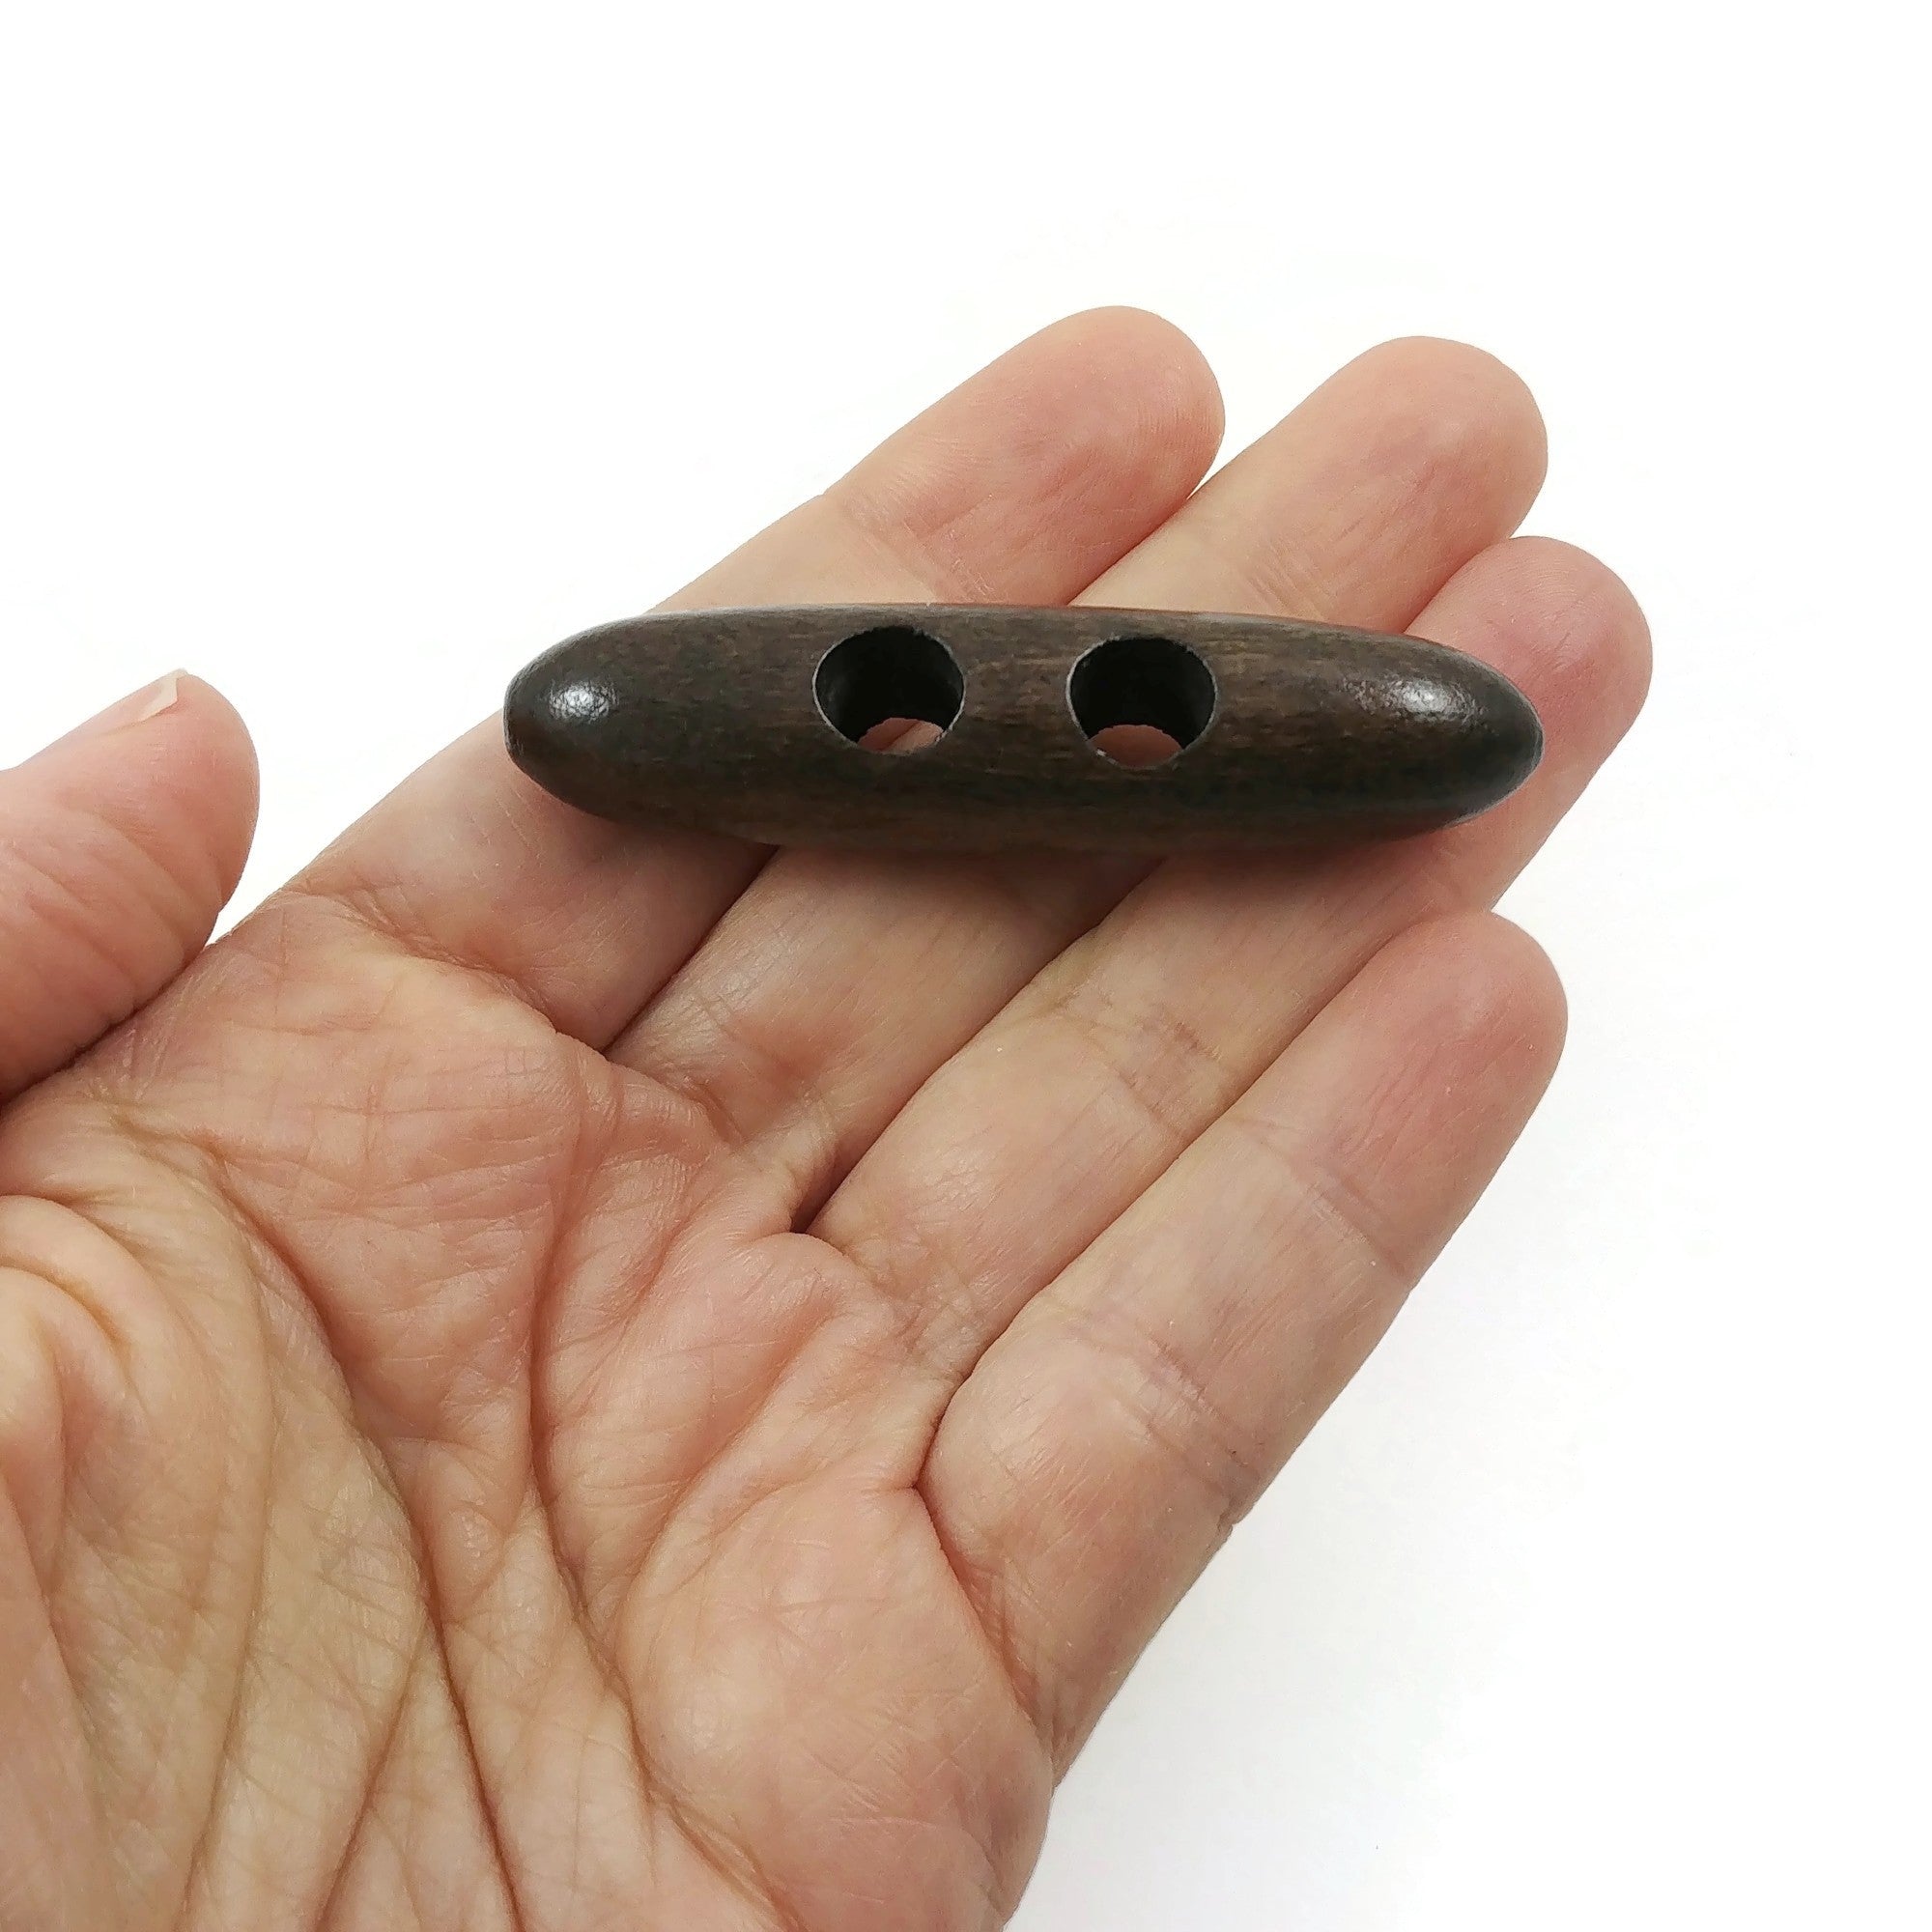 2 Large Toggle Buttons - Wood Dark Brown, Black or Khaki 6cm (2 3/8")